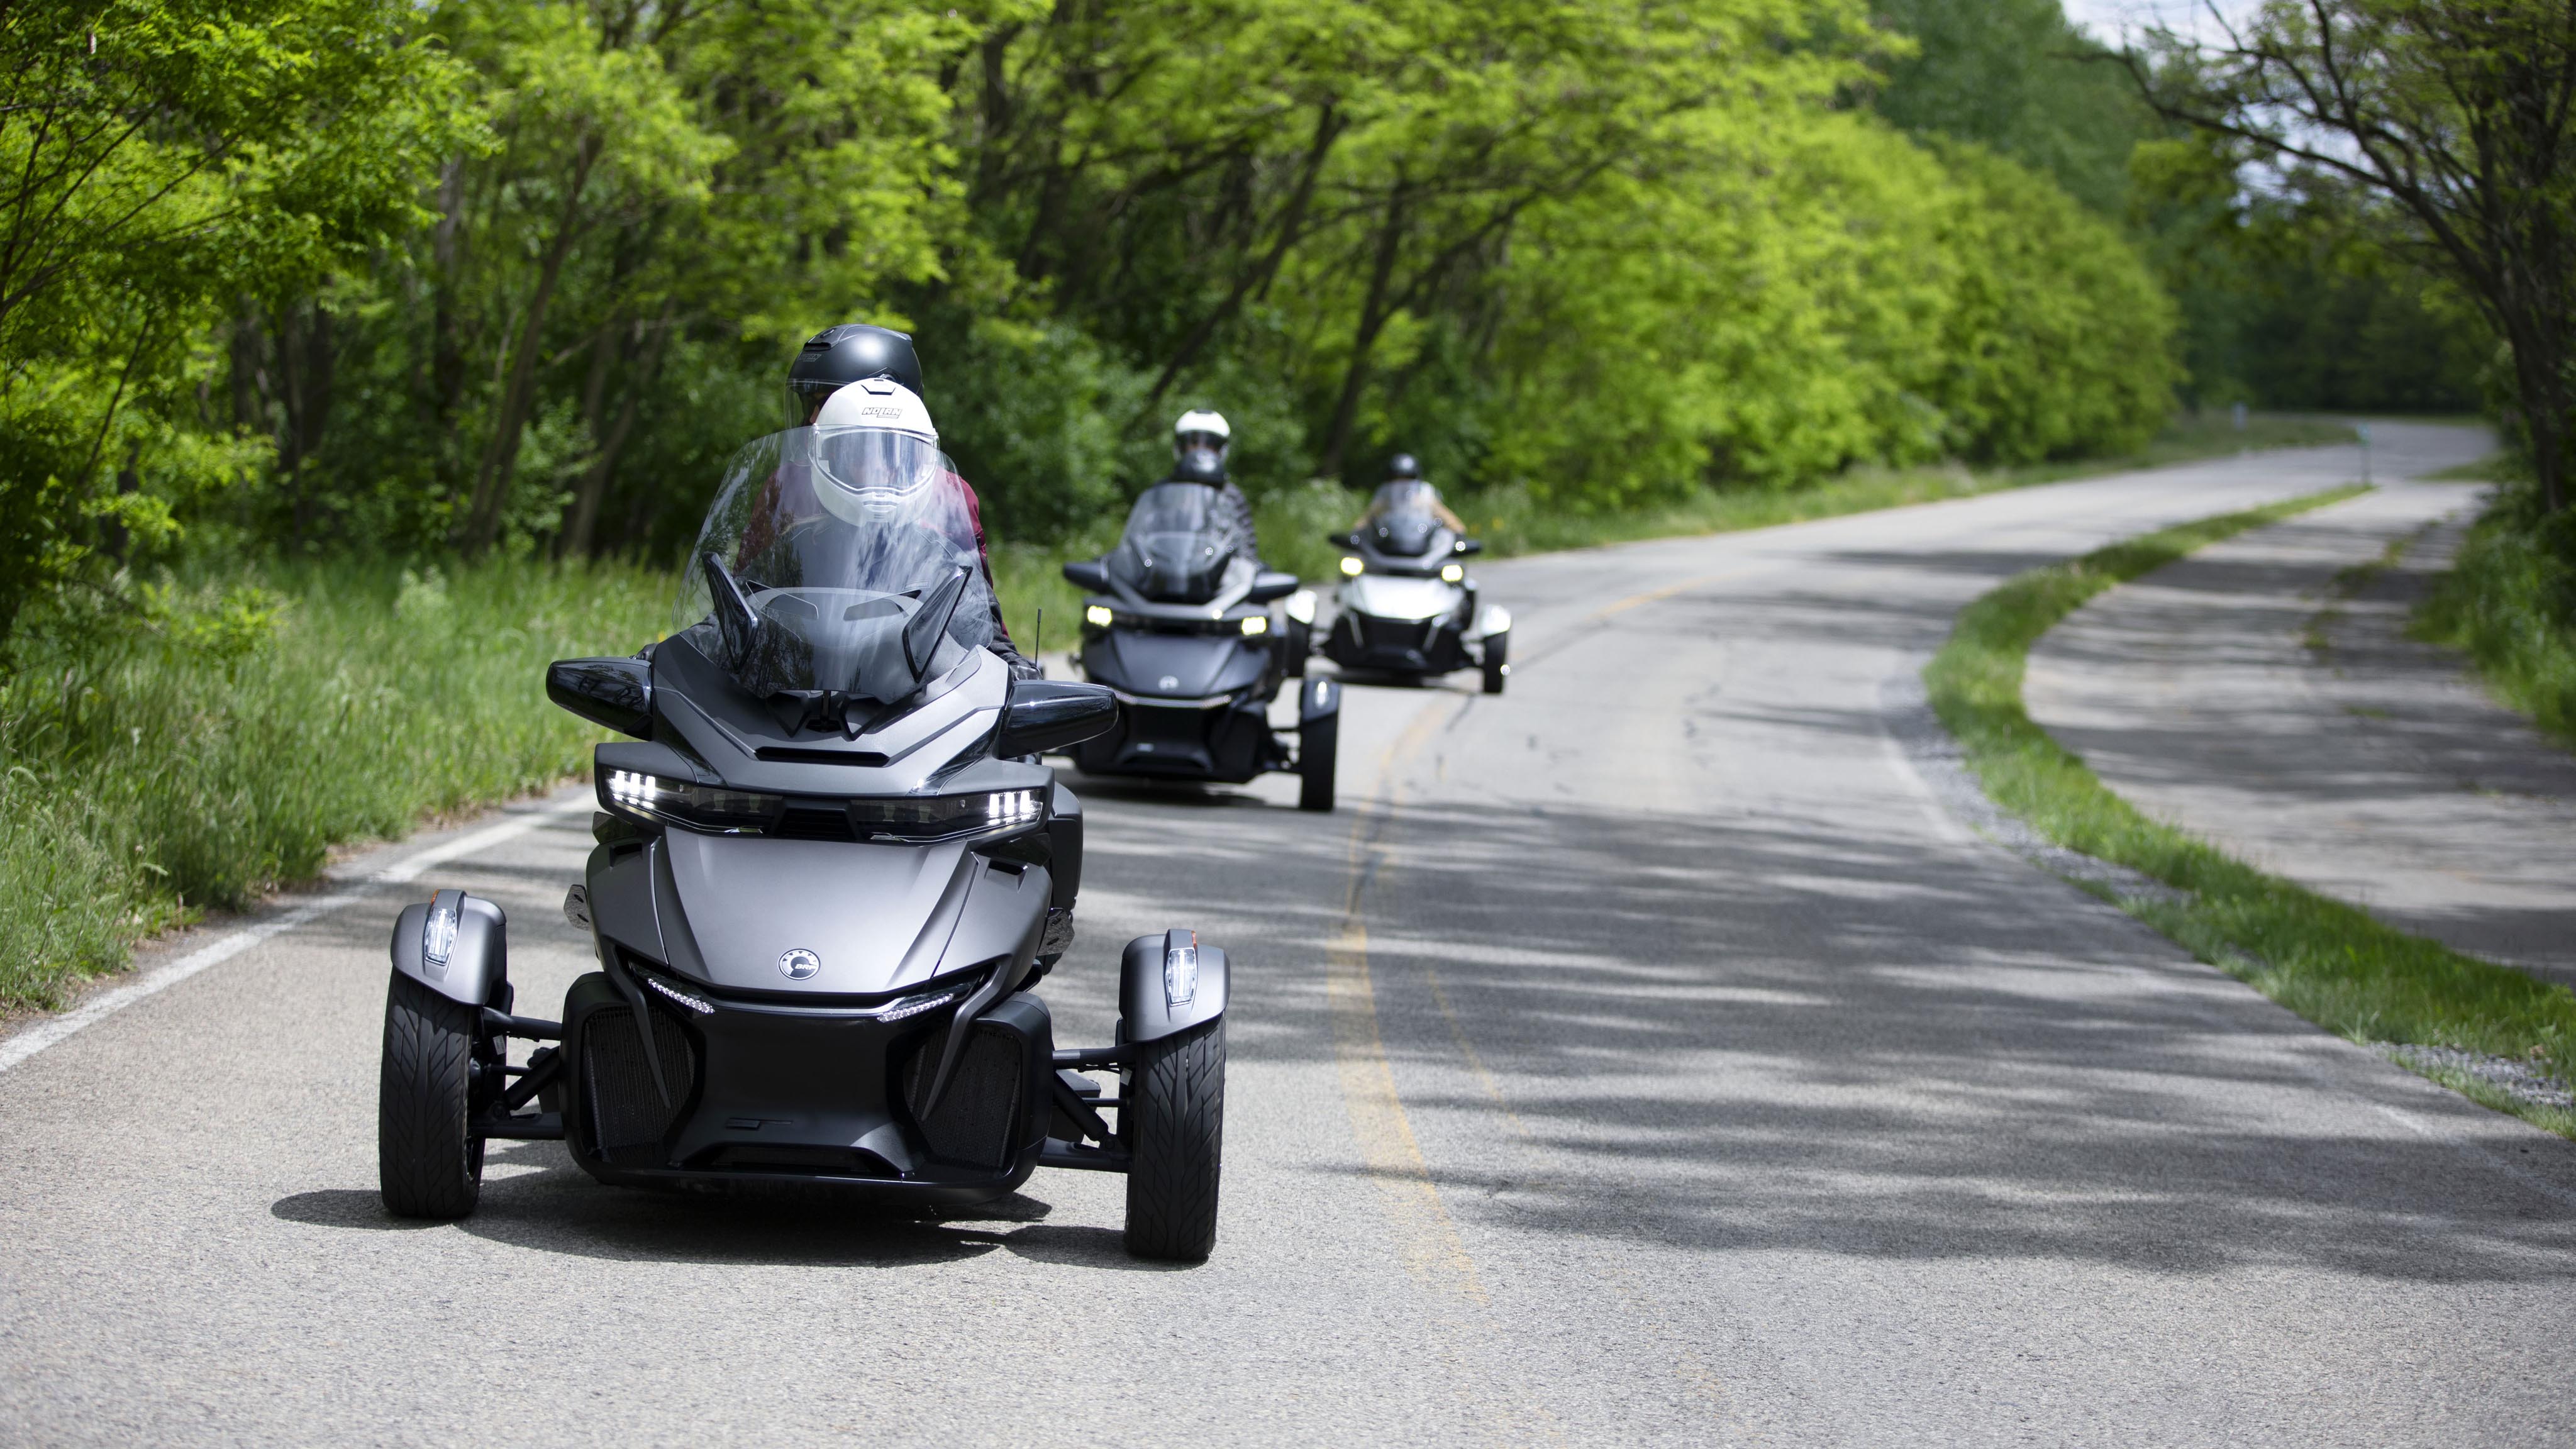 People riding Can-Am vehicles on a road